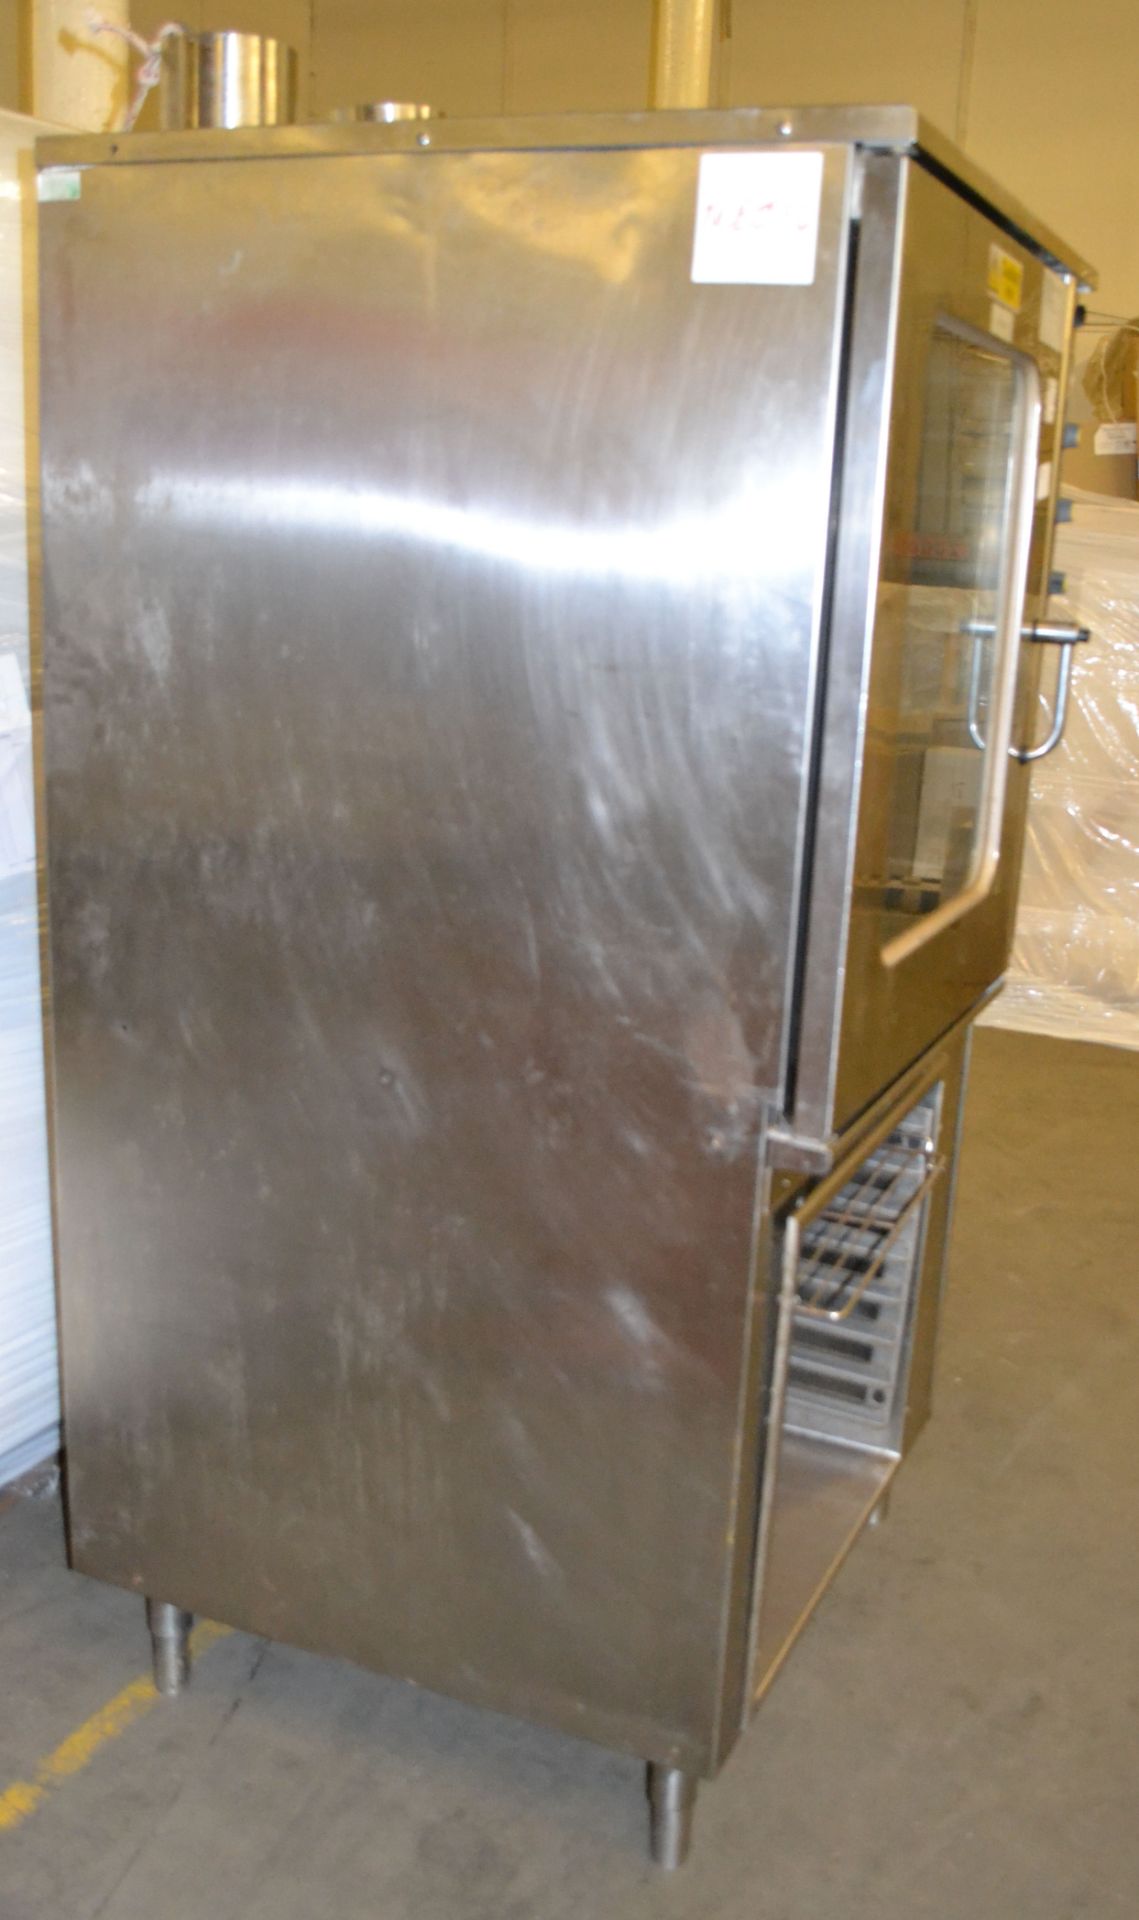 1 x Lainox MG110M LX Type Combination Oven with Pan Capacity - Ref:NCE032 - CL007 - Location: Bolton - Image 13 of 15